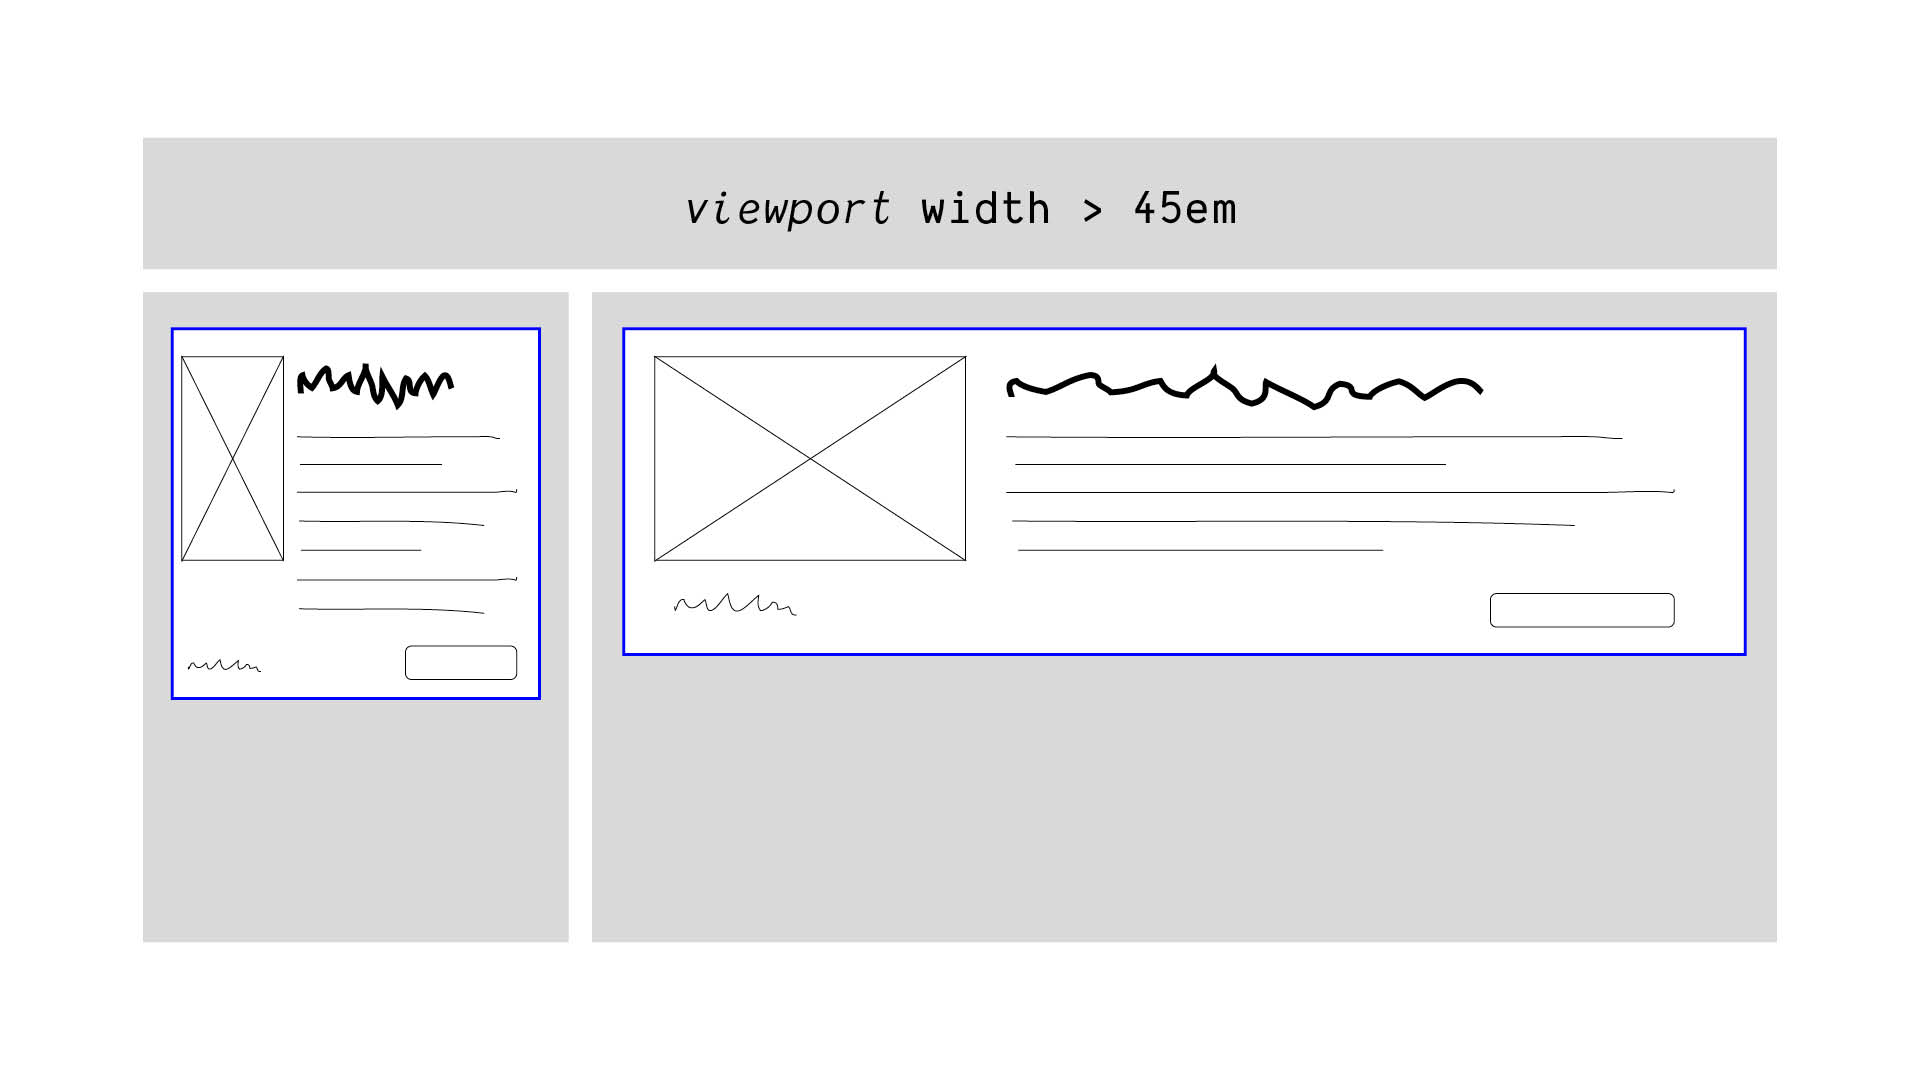 (viewport width > 45em) -
cards both using large layout,
but one is in a small sidebar container
